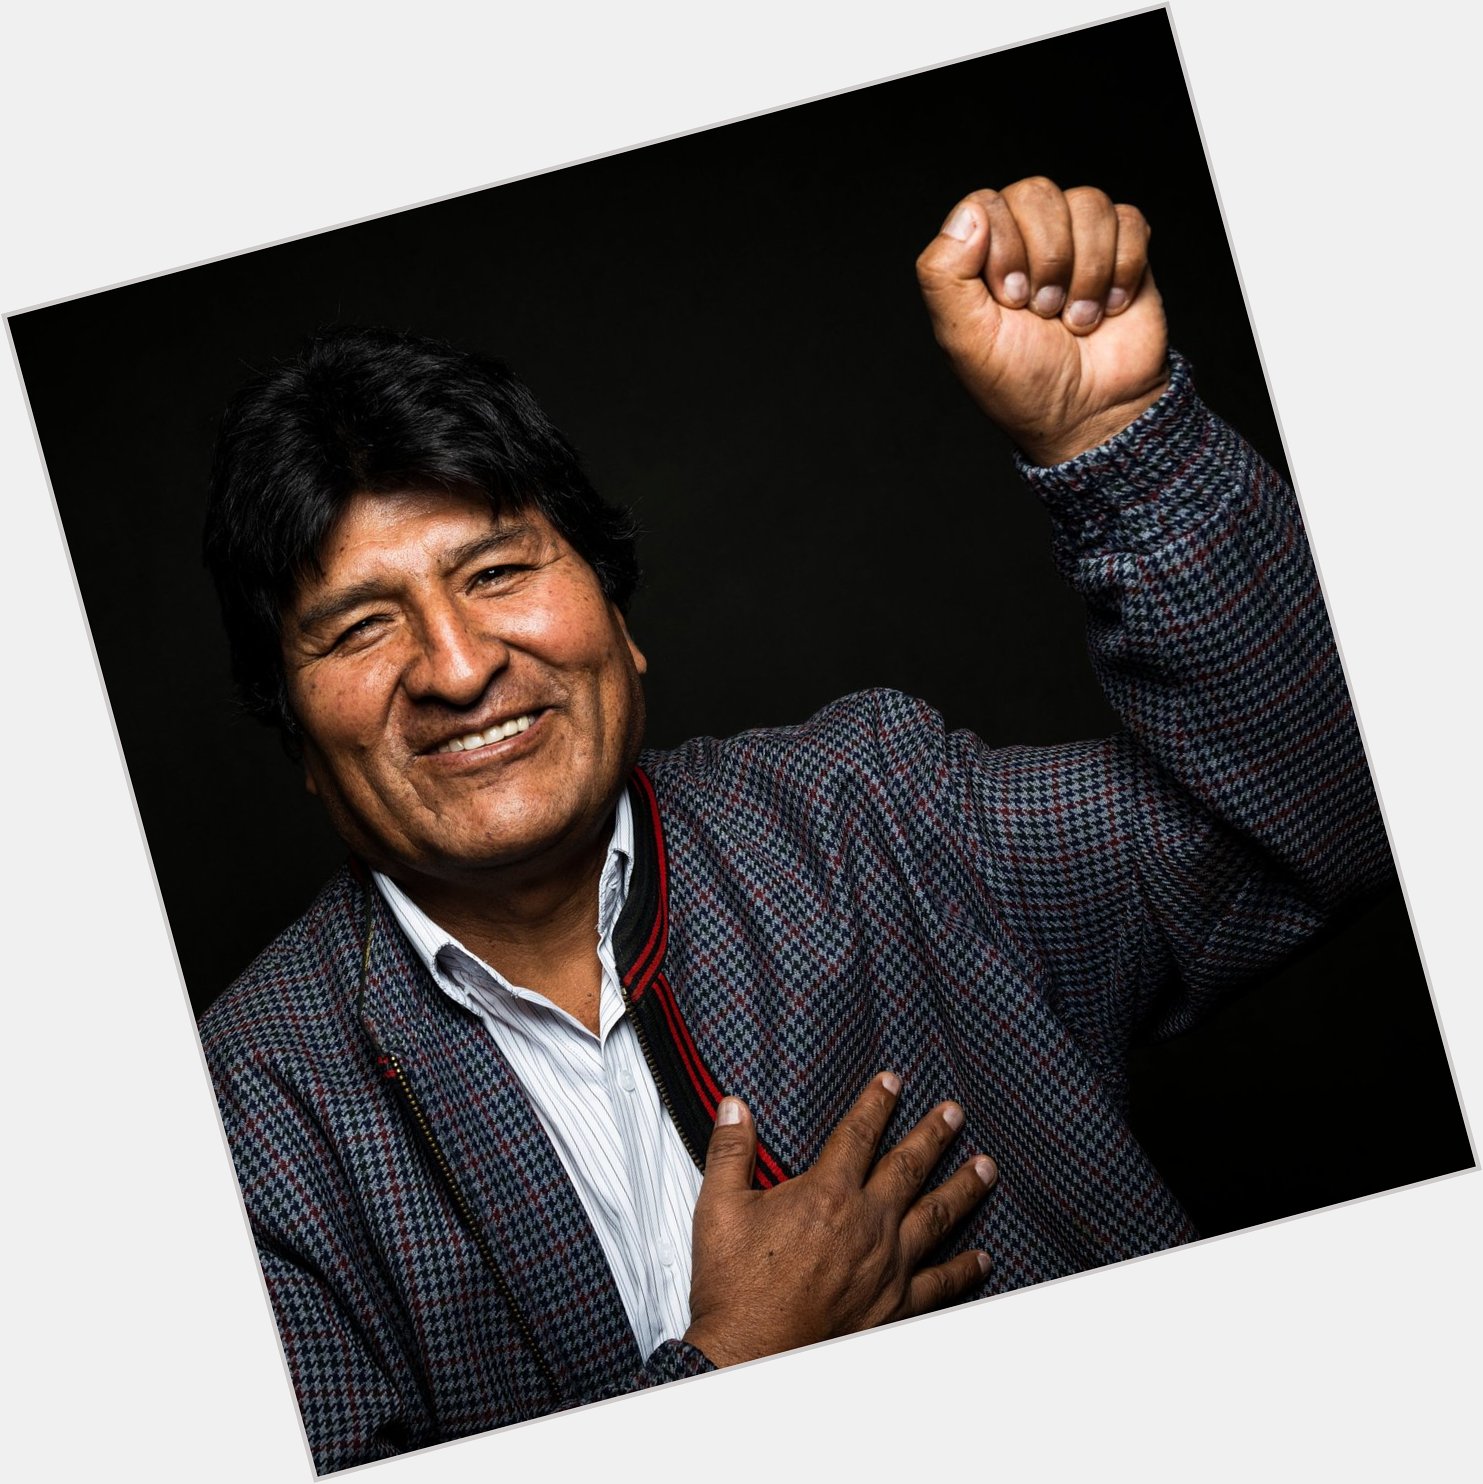 Happy Revolutionary Birthday to Evo Morales! An upright leader in a time of fools and monsters. 